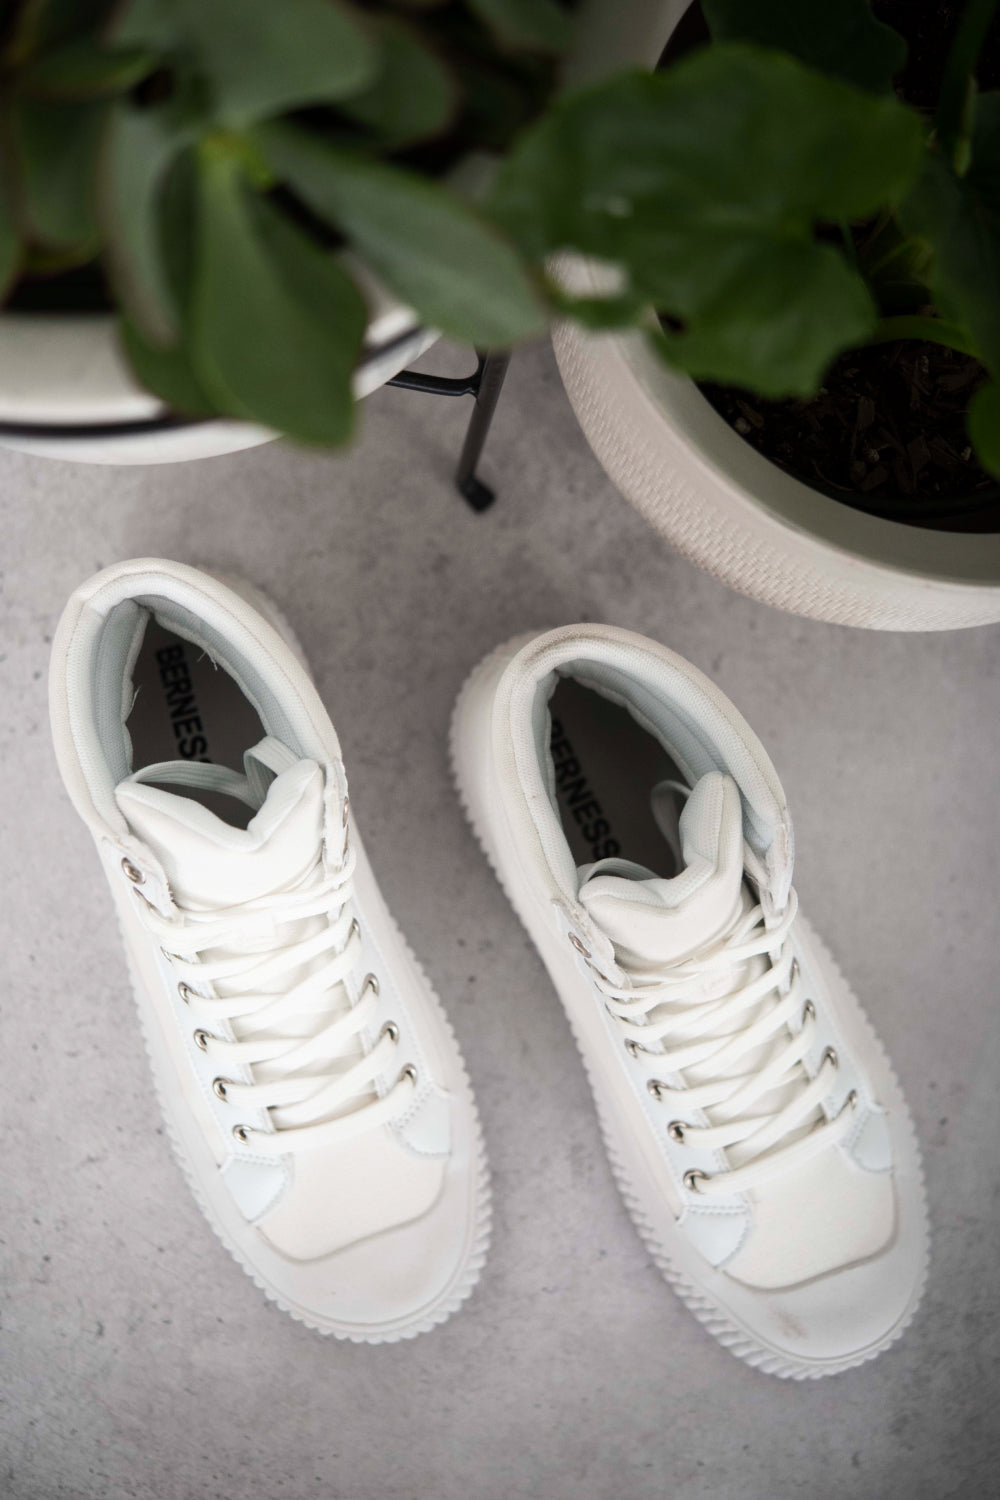 Berness Lace-Up High-Top Sneakers